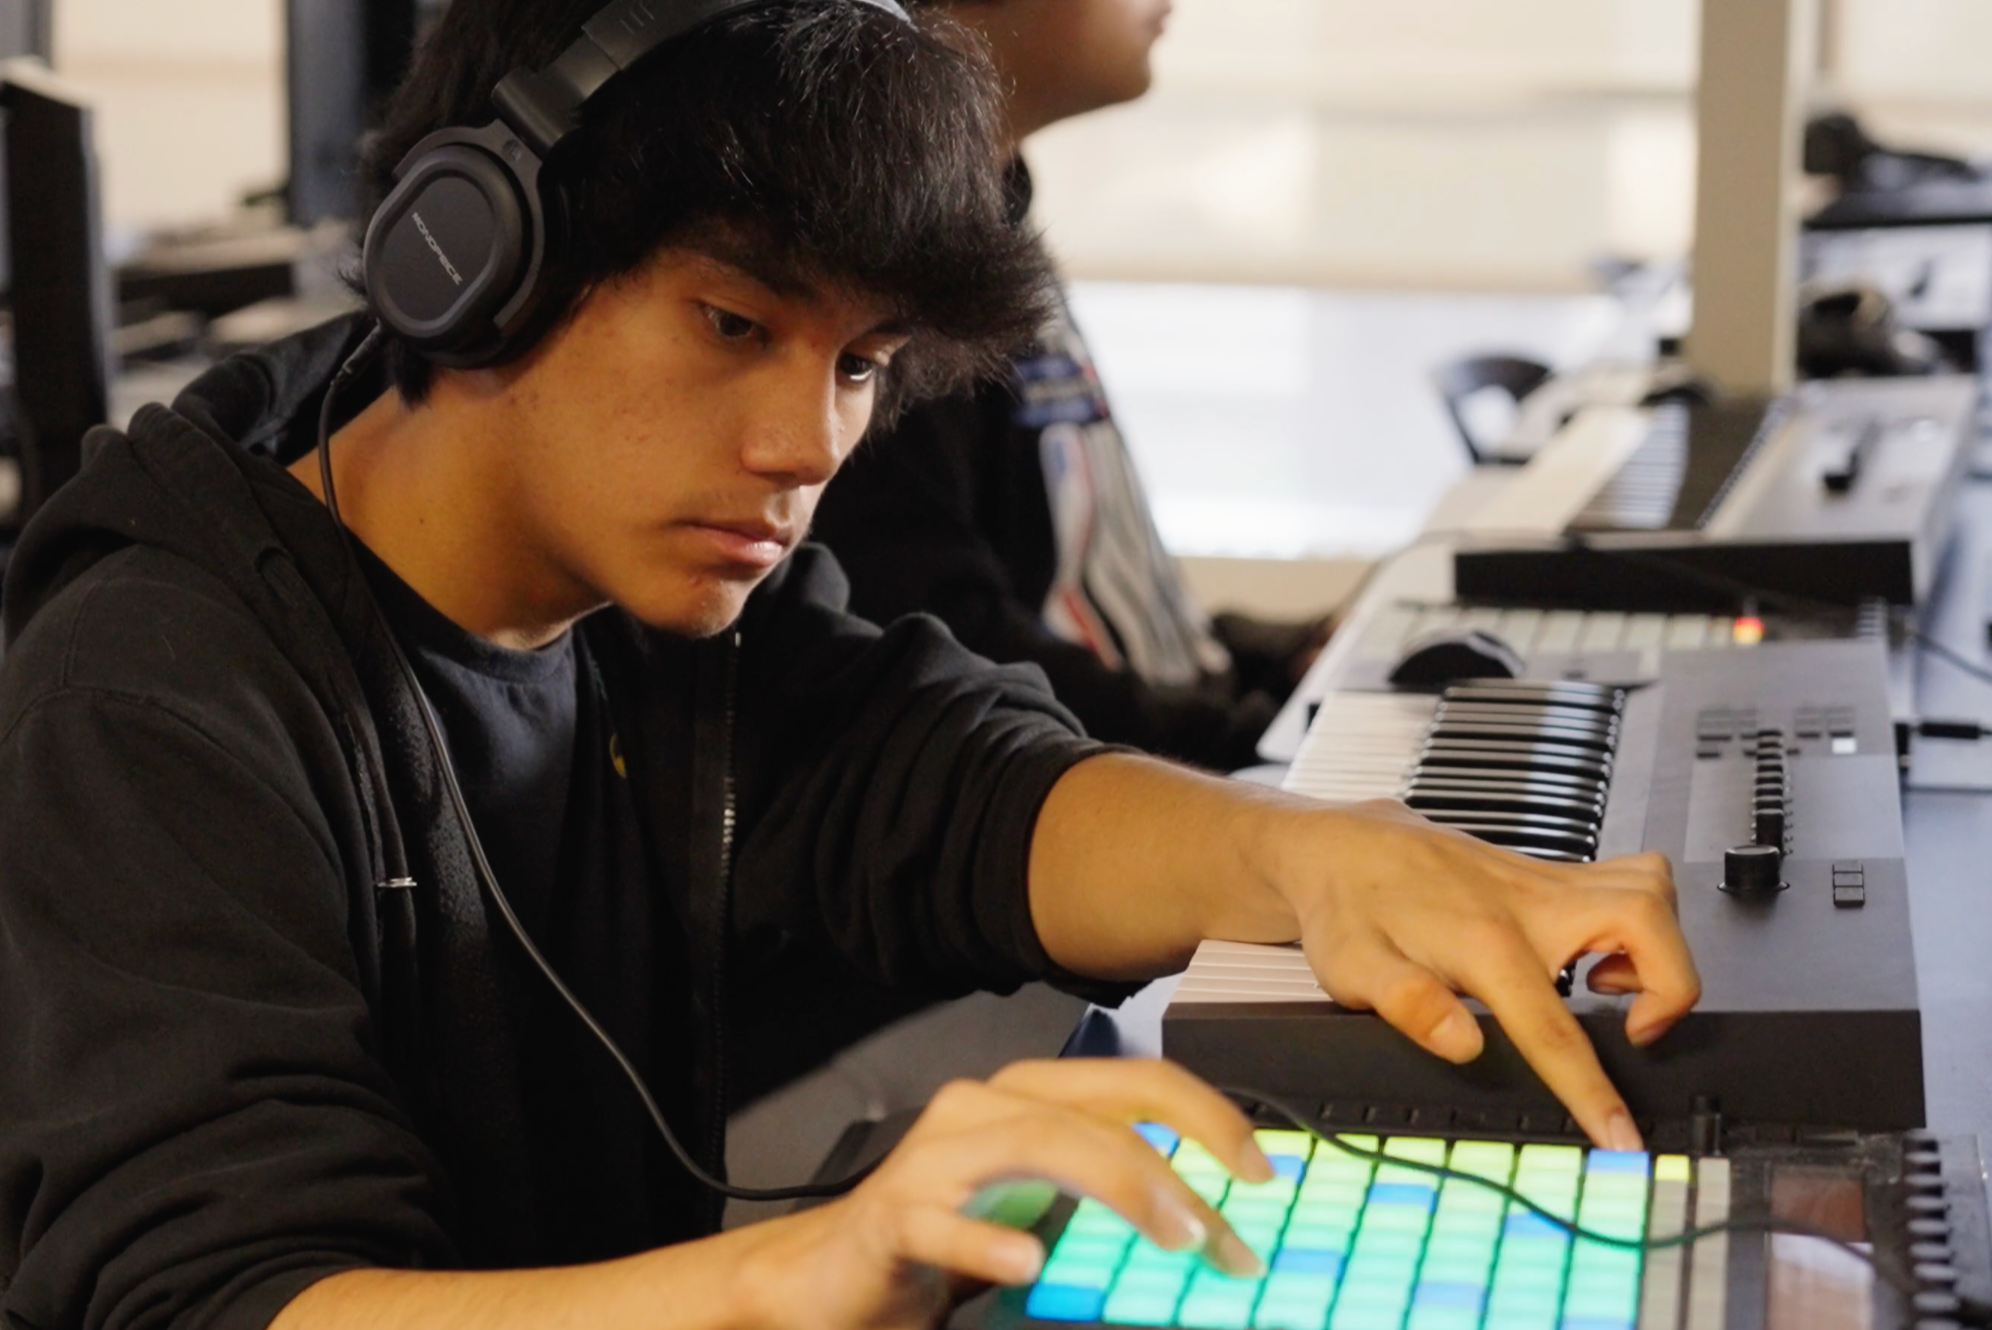 male student working on an audio mixing soundboard while wearing headphones